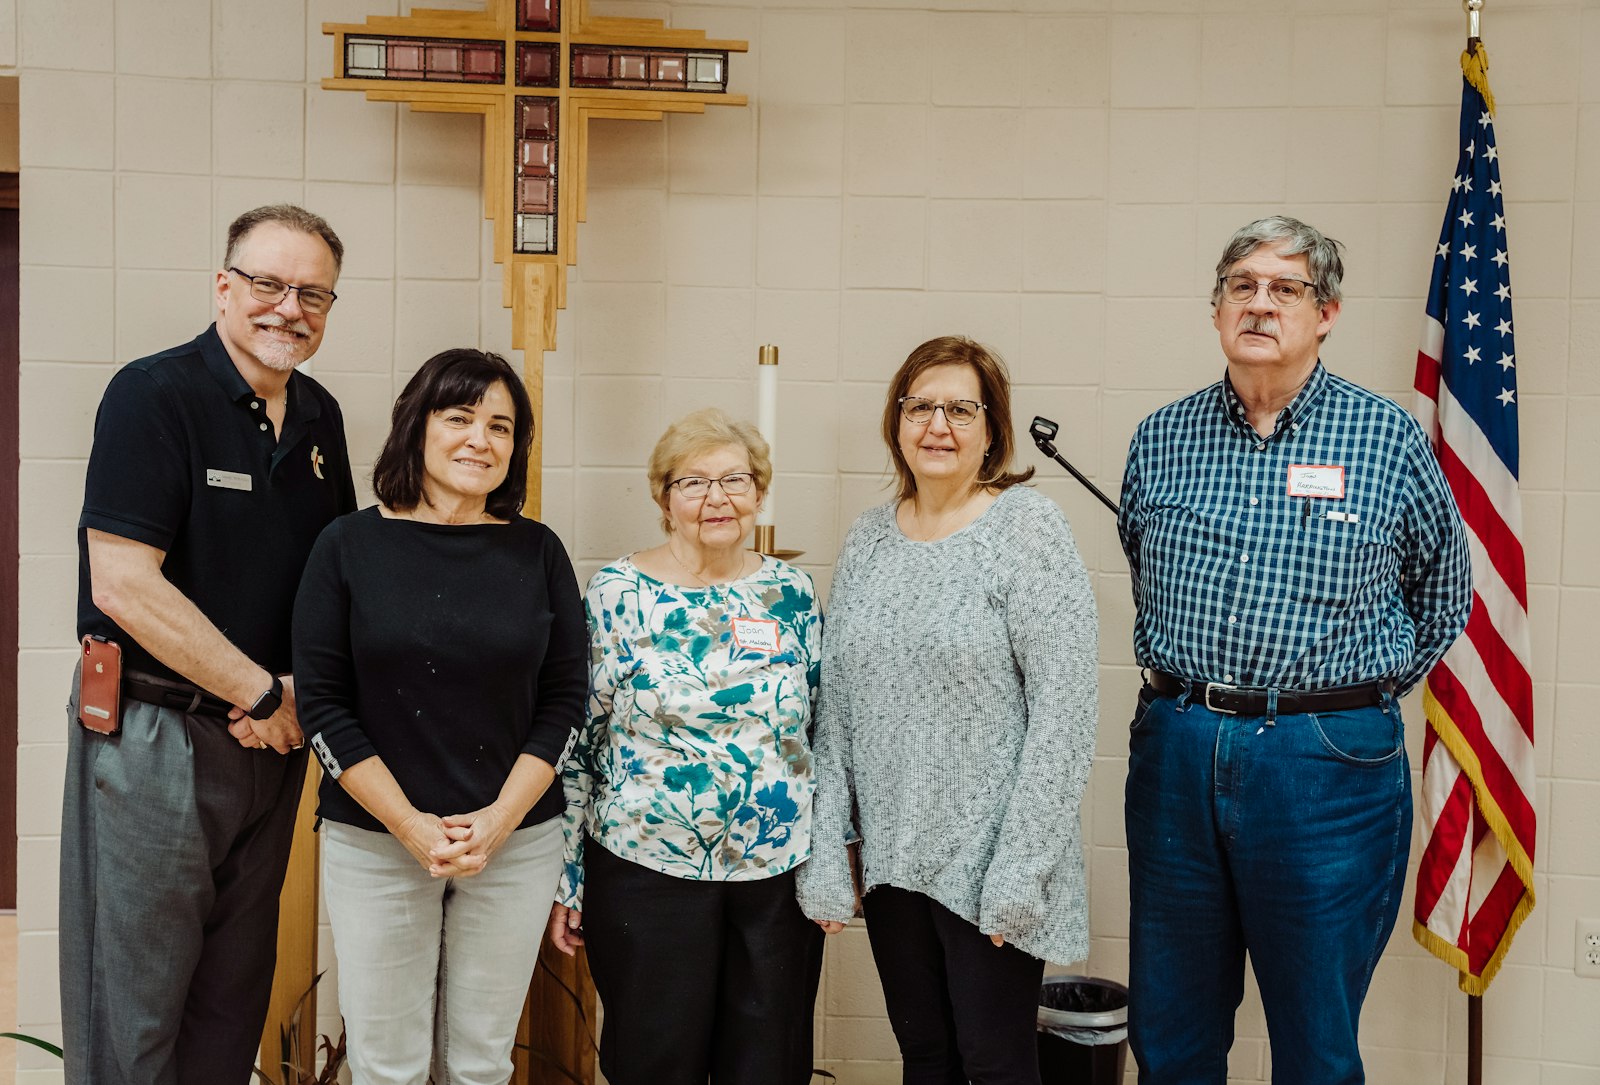 Left to right, Deacon Marc Rybinski (St. Paul of Tarsus), Cheryl Cannon (St. Thecla), Joan Jeffers (St. Malachy), Carol Challis (St. Malachy) and John Harrington (St. Ronald) pose for a photo after a March 15 meeting of Christian service leaders for the four parishes, which together make up Central Macomb Family 5. (Valaurian Waller | Detroit Catholic)